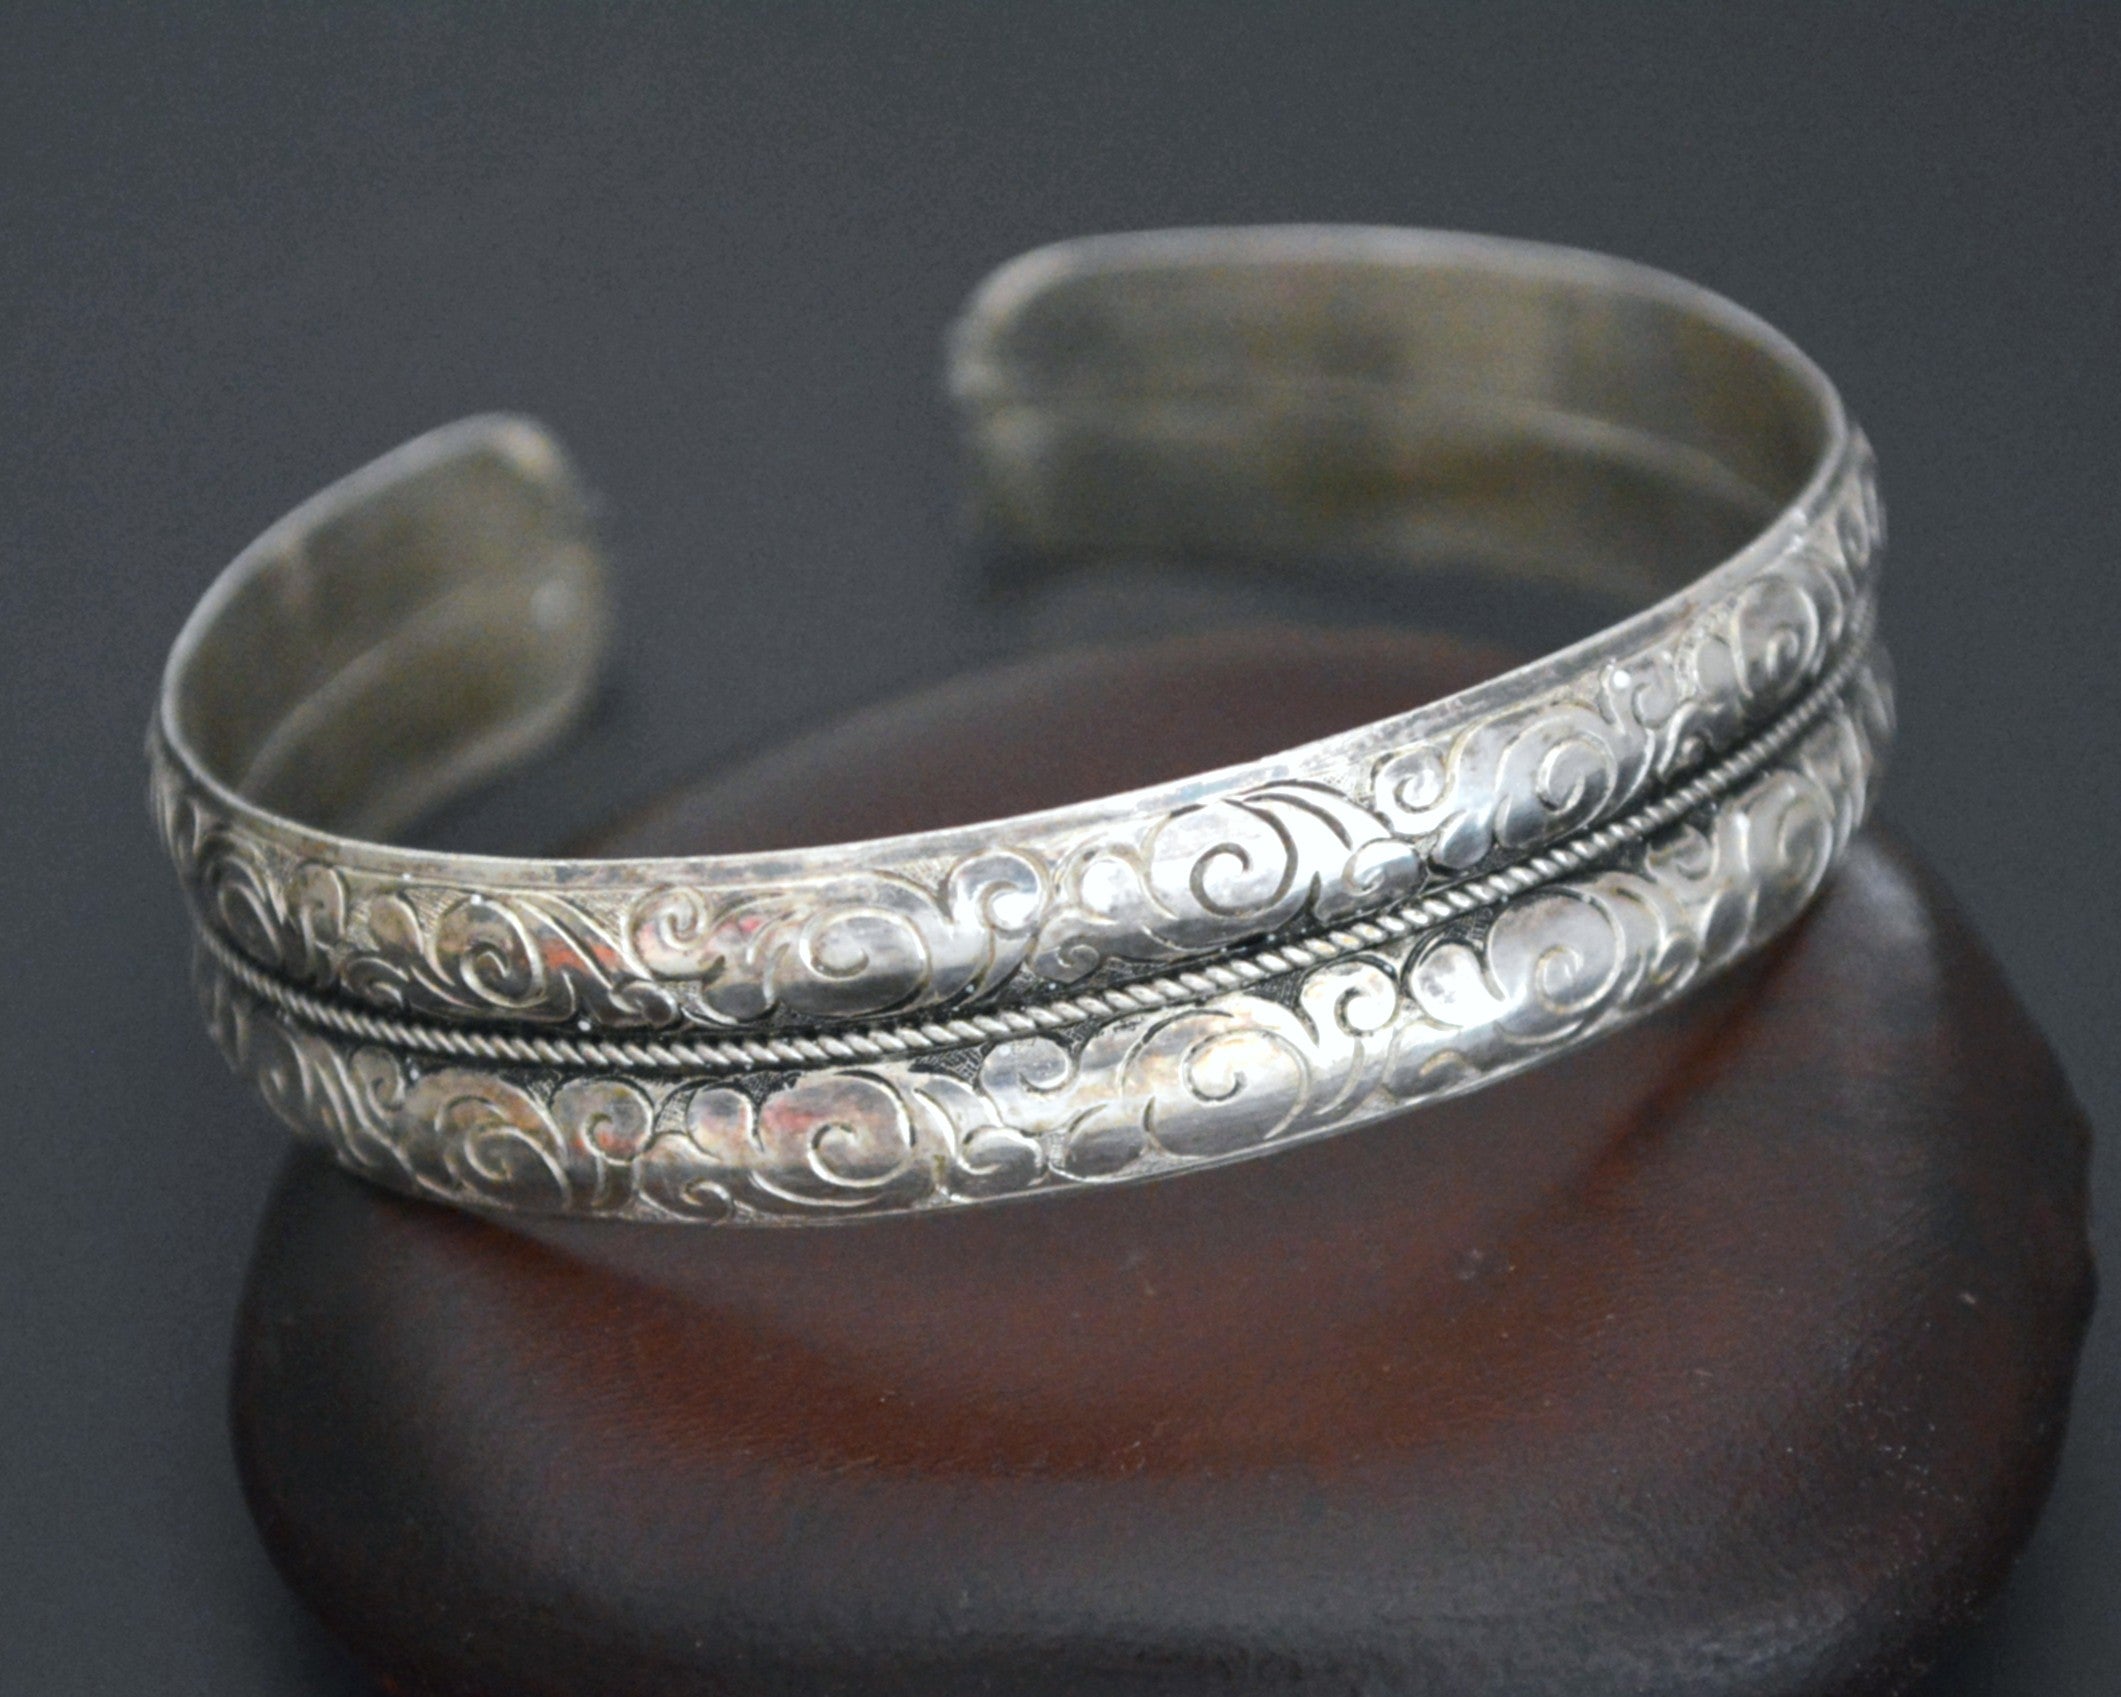 Nepali Silver Cuff Bracelet with Carvings